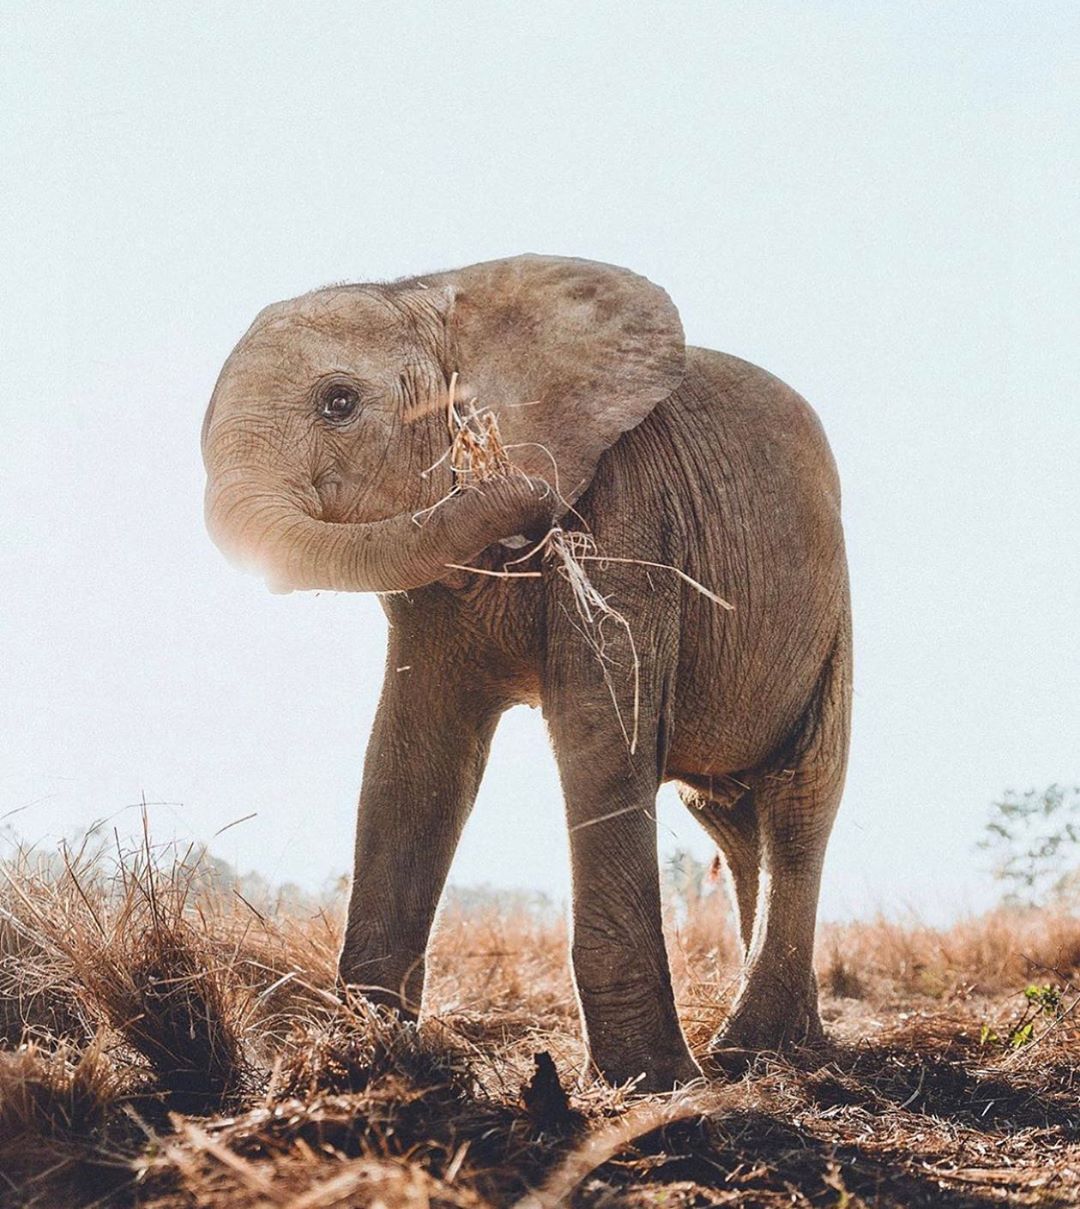 Ivory Ella - The bad news is, without urgent action to save the species, elephants could disappear from the wild within a single generation. The good news? You can help us save them. 10% of all our ne...